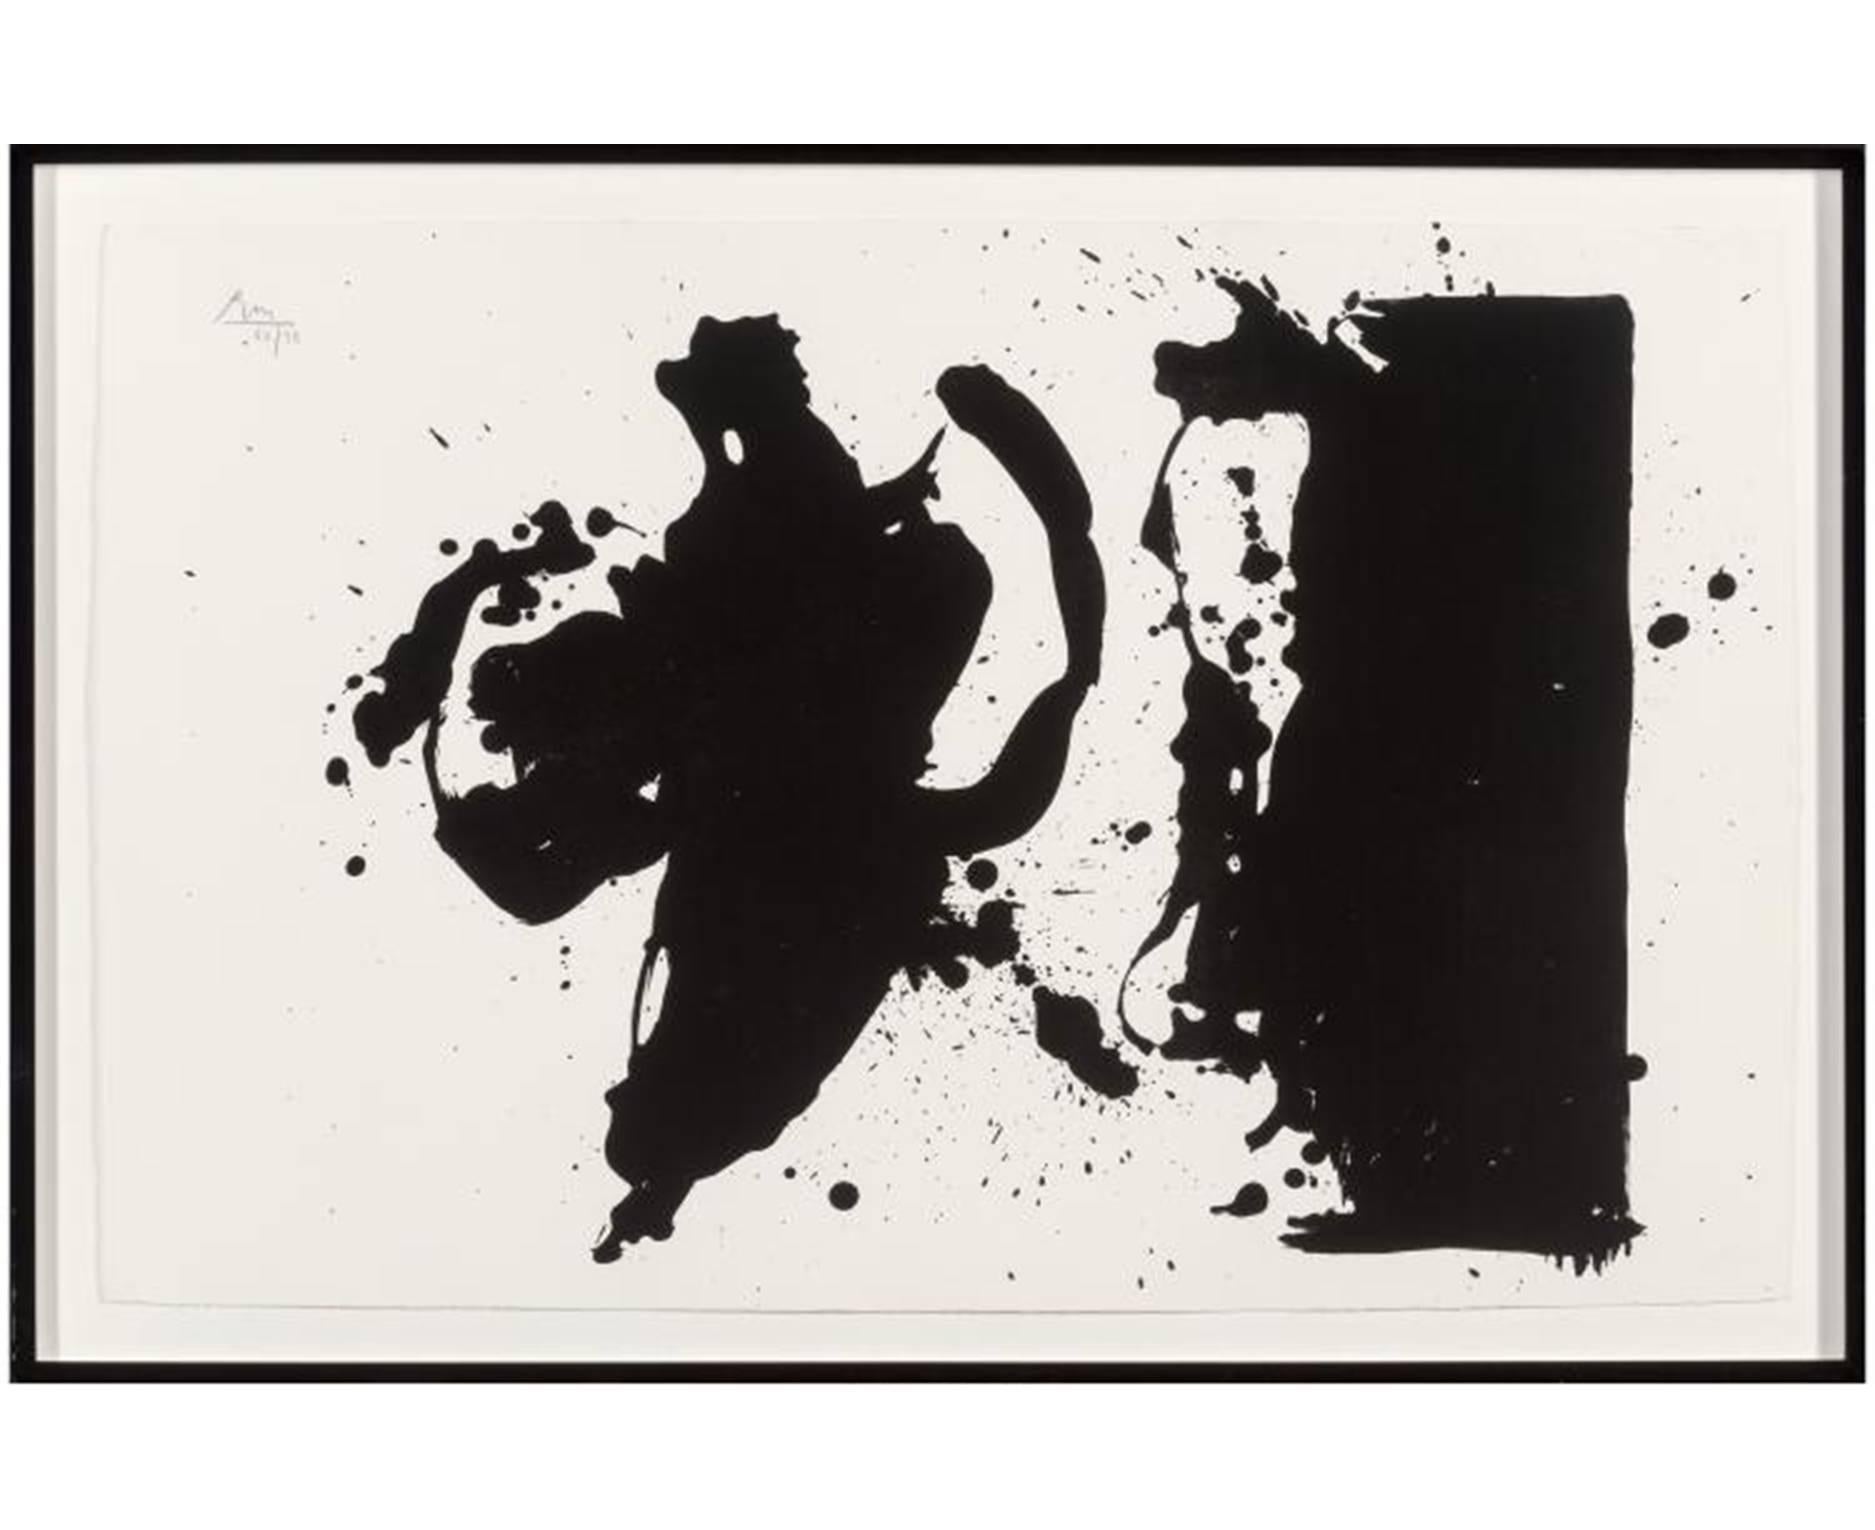 Elegy (Study) - Abstract Expressionist Print by Robert Motherwell